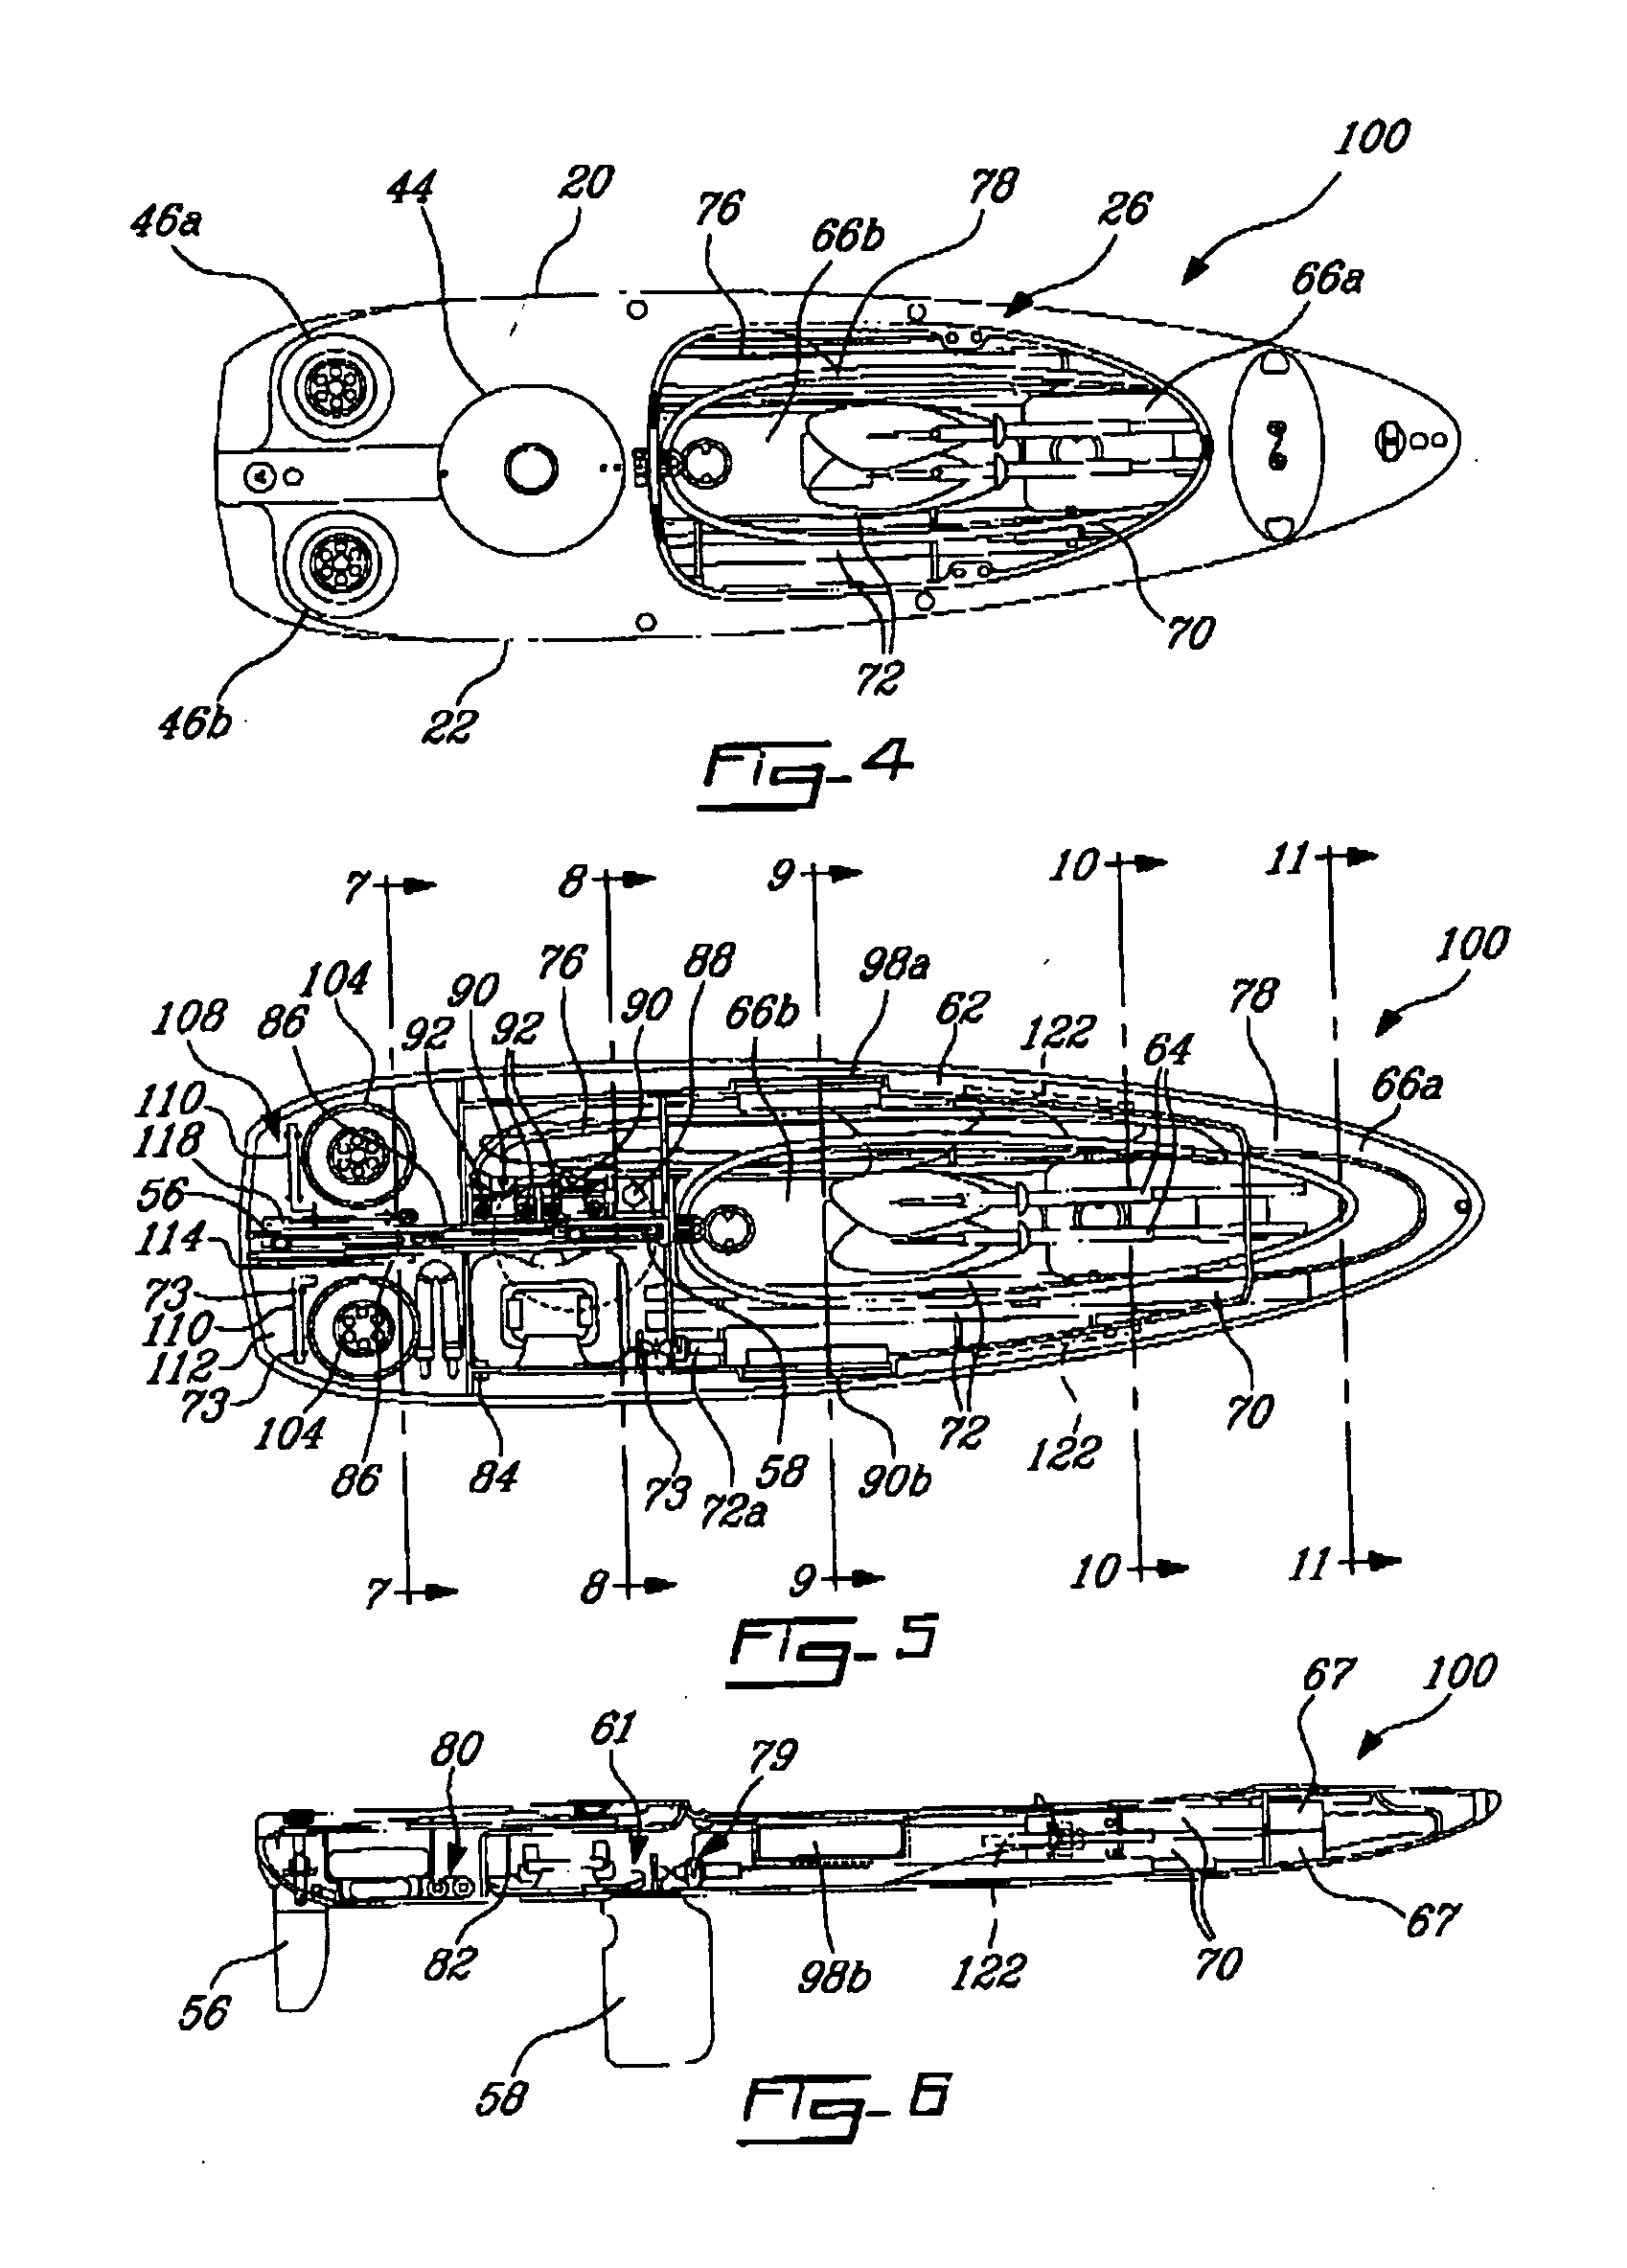 Transformable, Multifunctional and Self-Stowage Watercraft